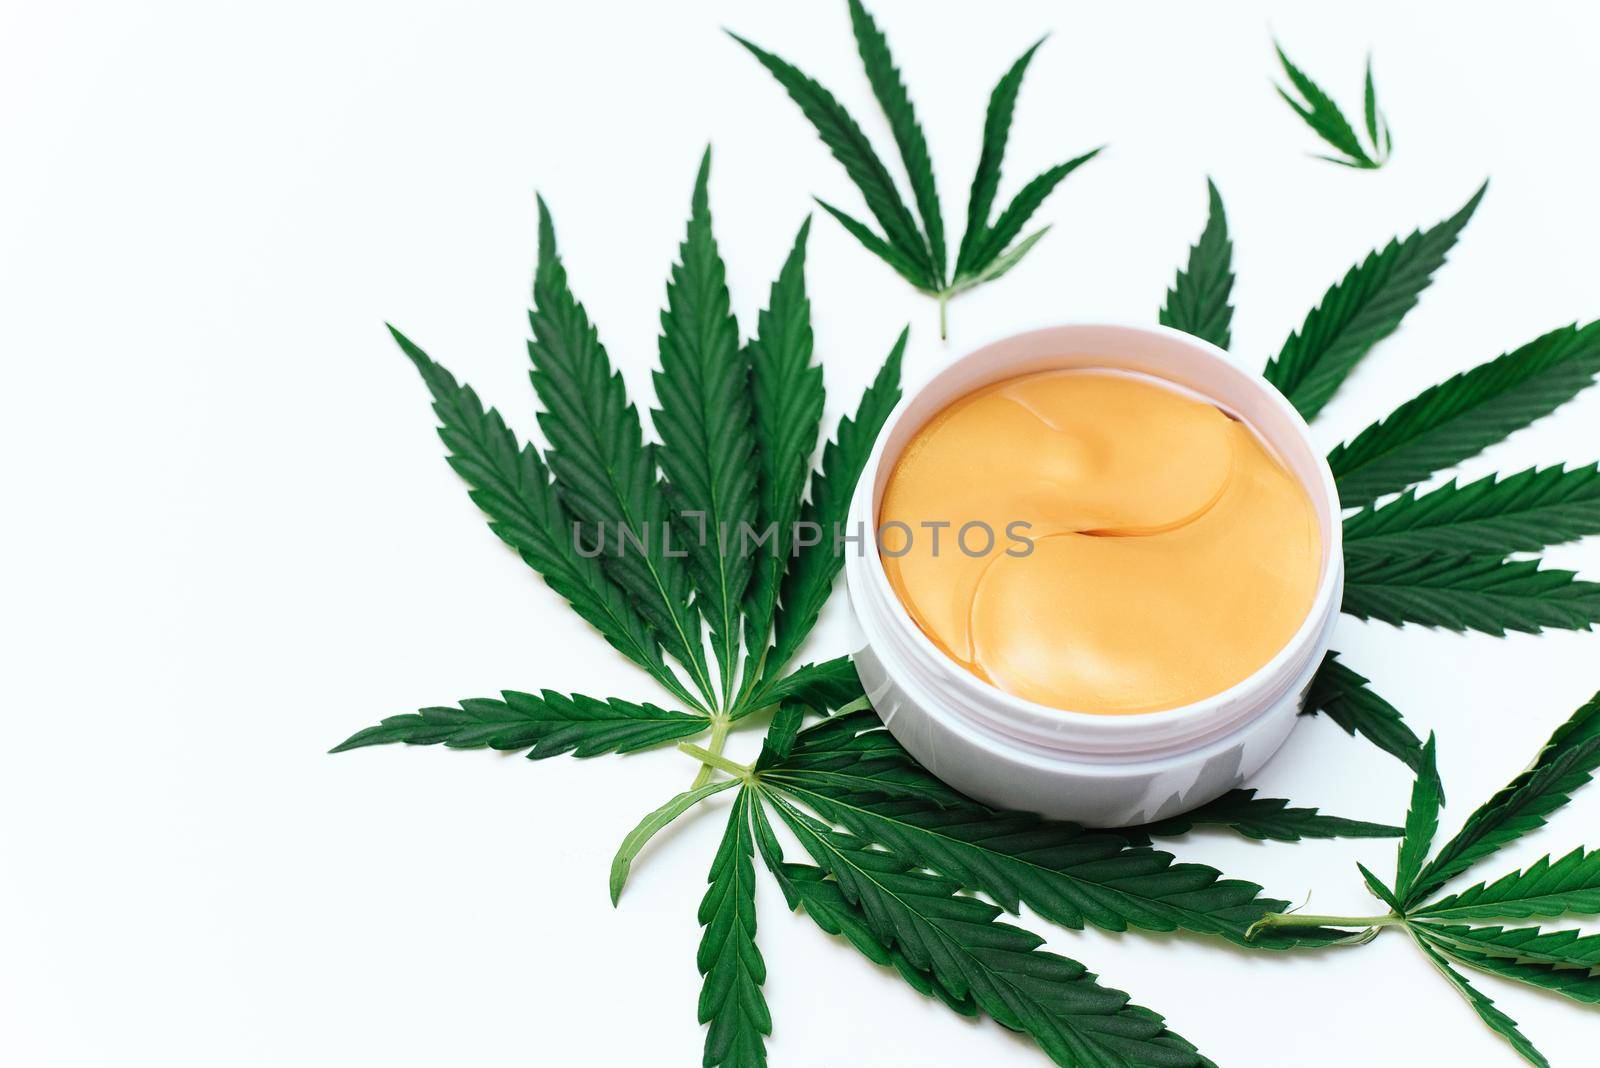 Hydrogel patches with cannabis or hemp oil on white background.